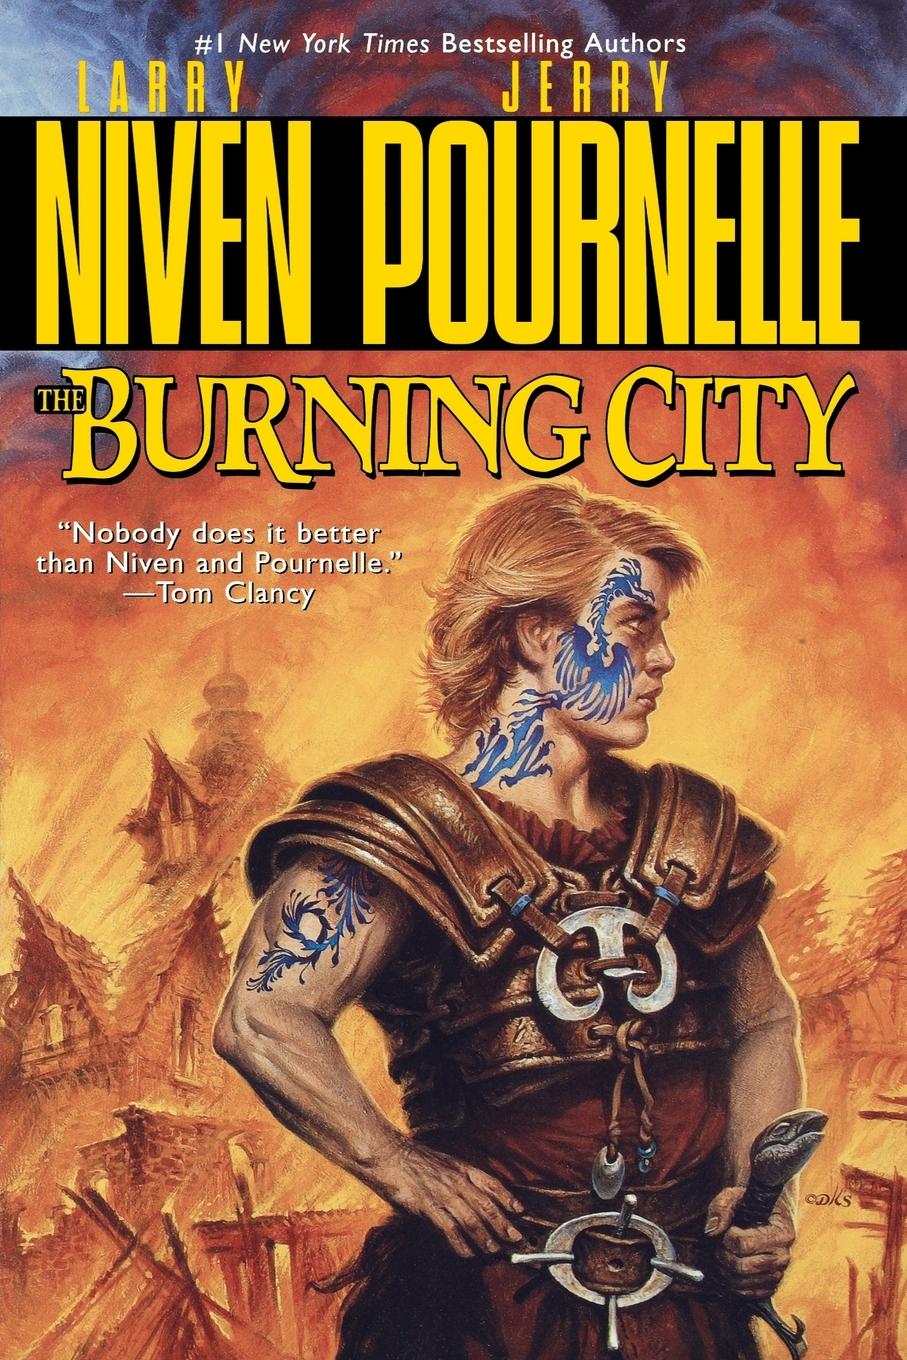 The Burning City - Niven, Larry|Pournelle, Jerry